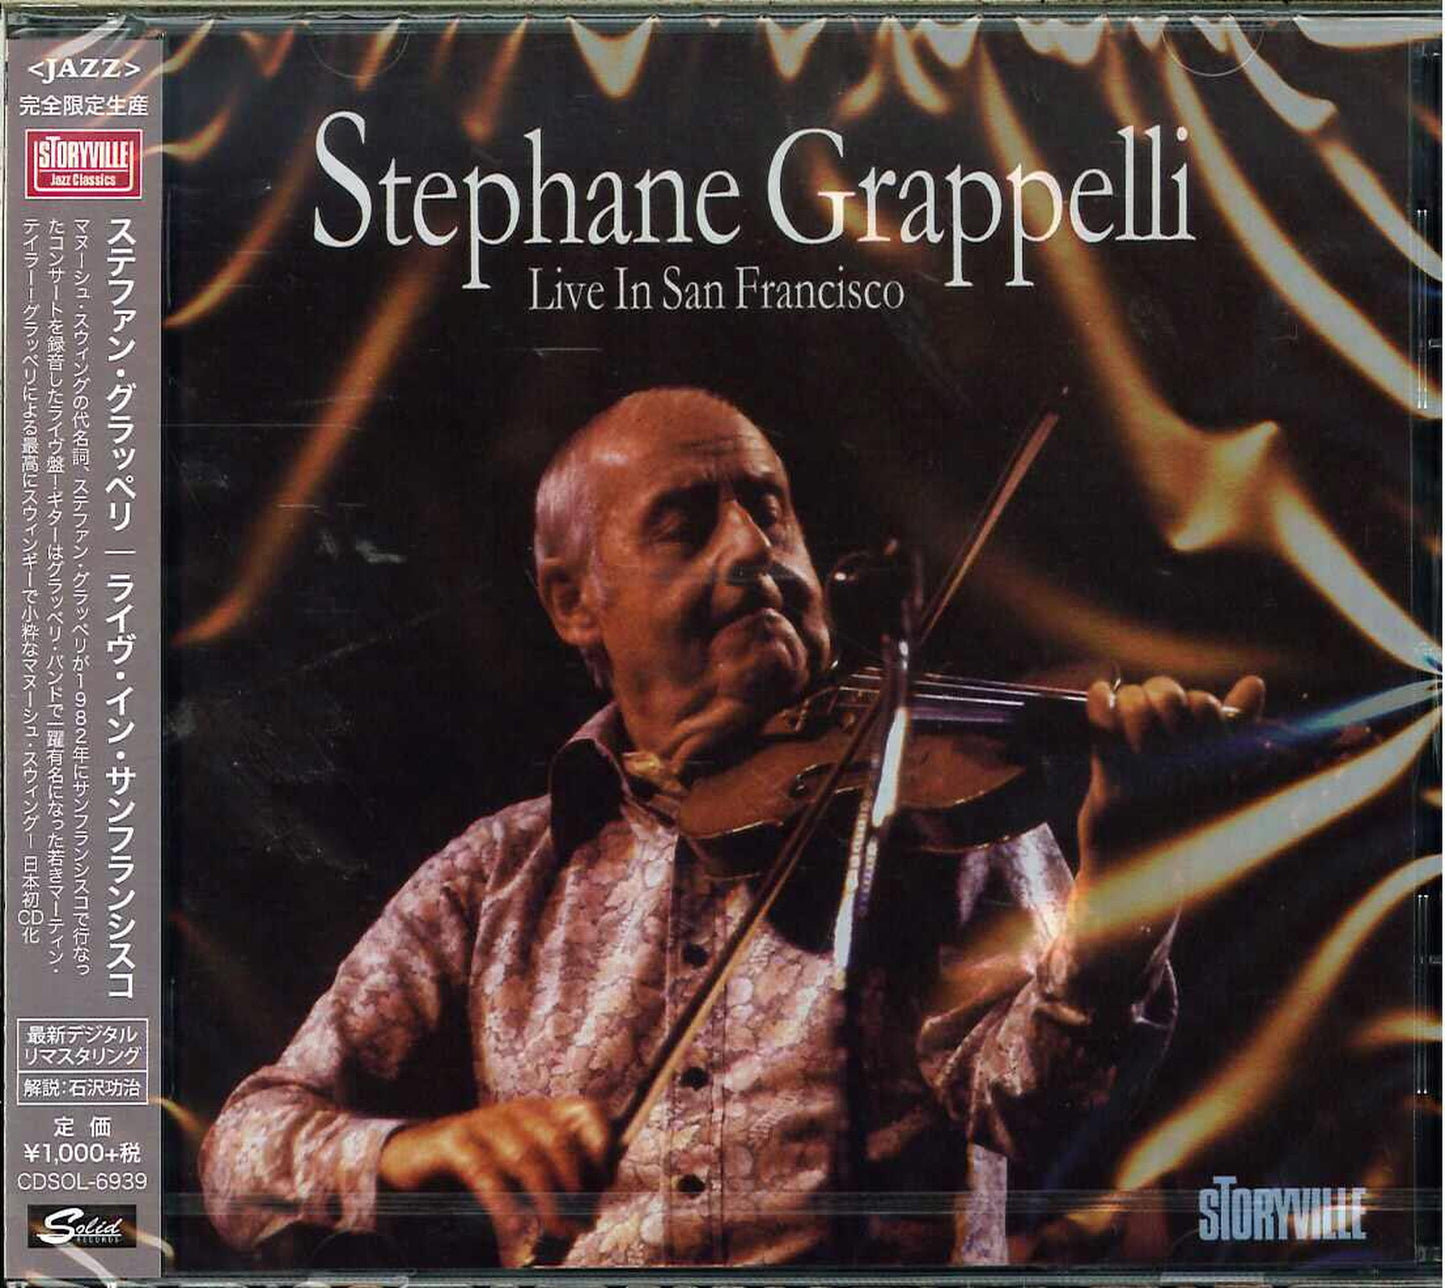 Stephane Grappelli - Live In San Francisco - Limited Edition